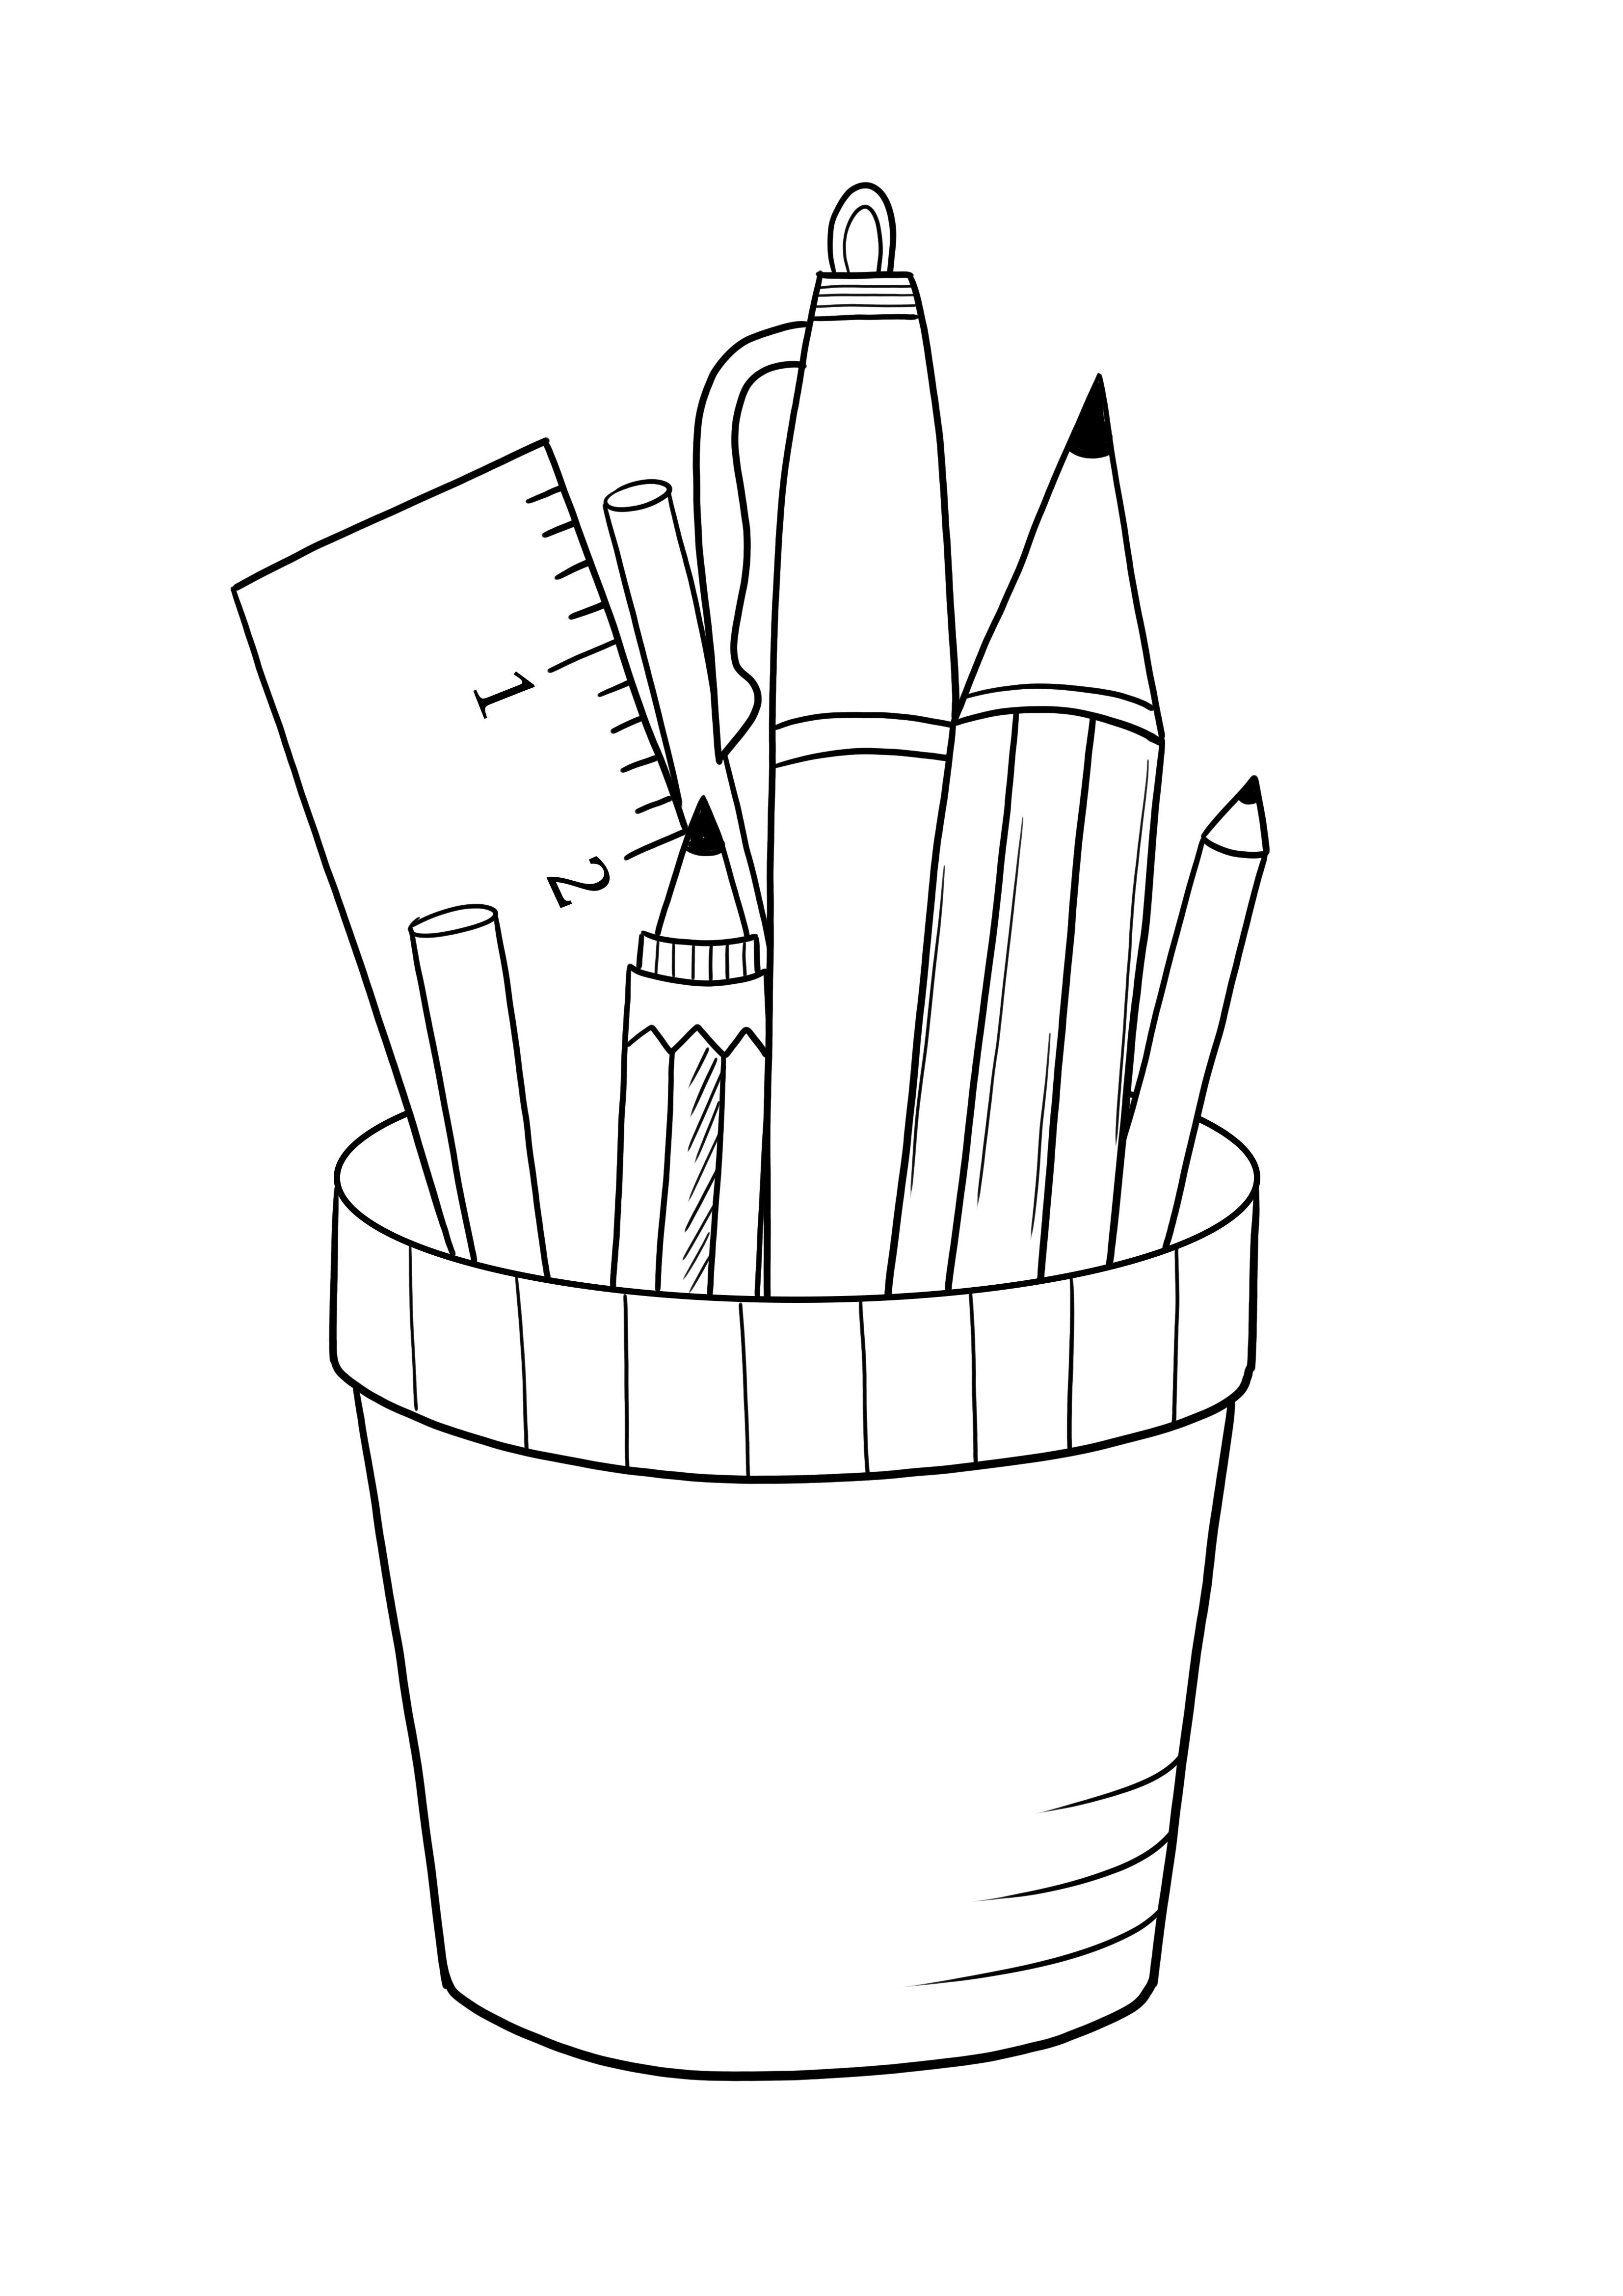 Coloring Page pen - free printable coloring pages - Img 22472